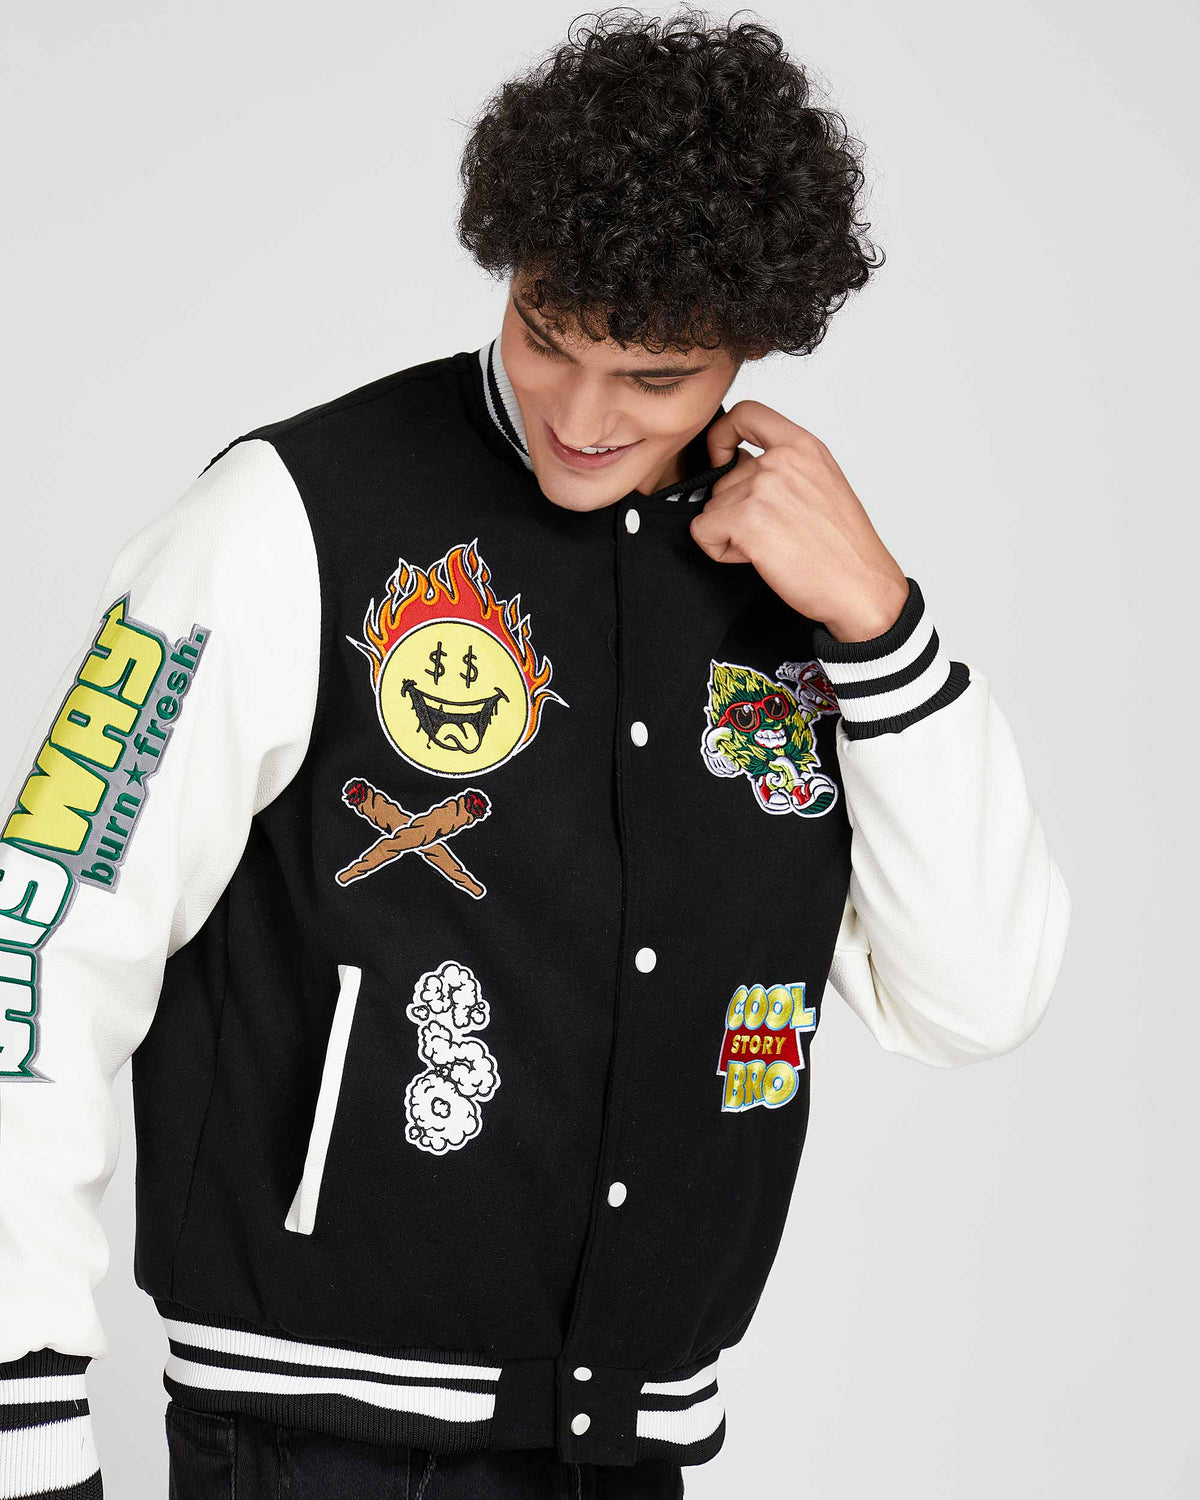 Vintage Baseball Jacket with Patches